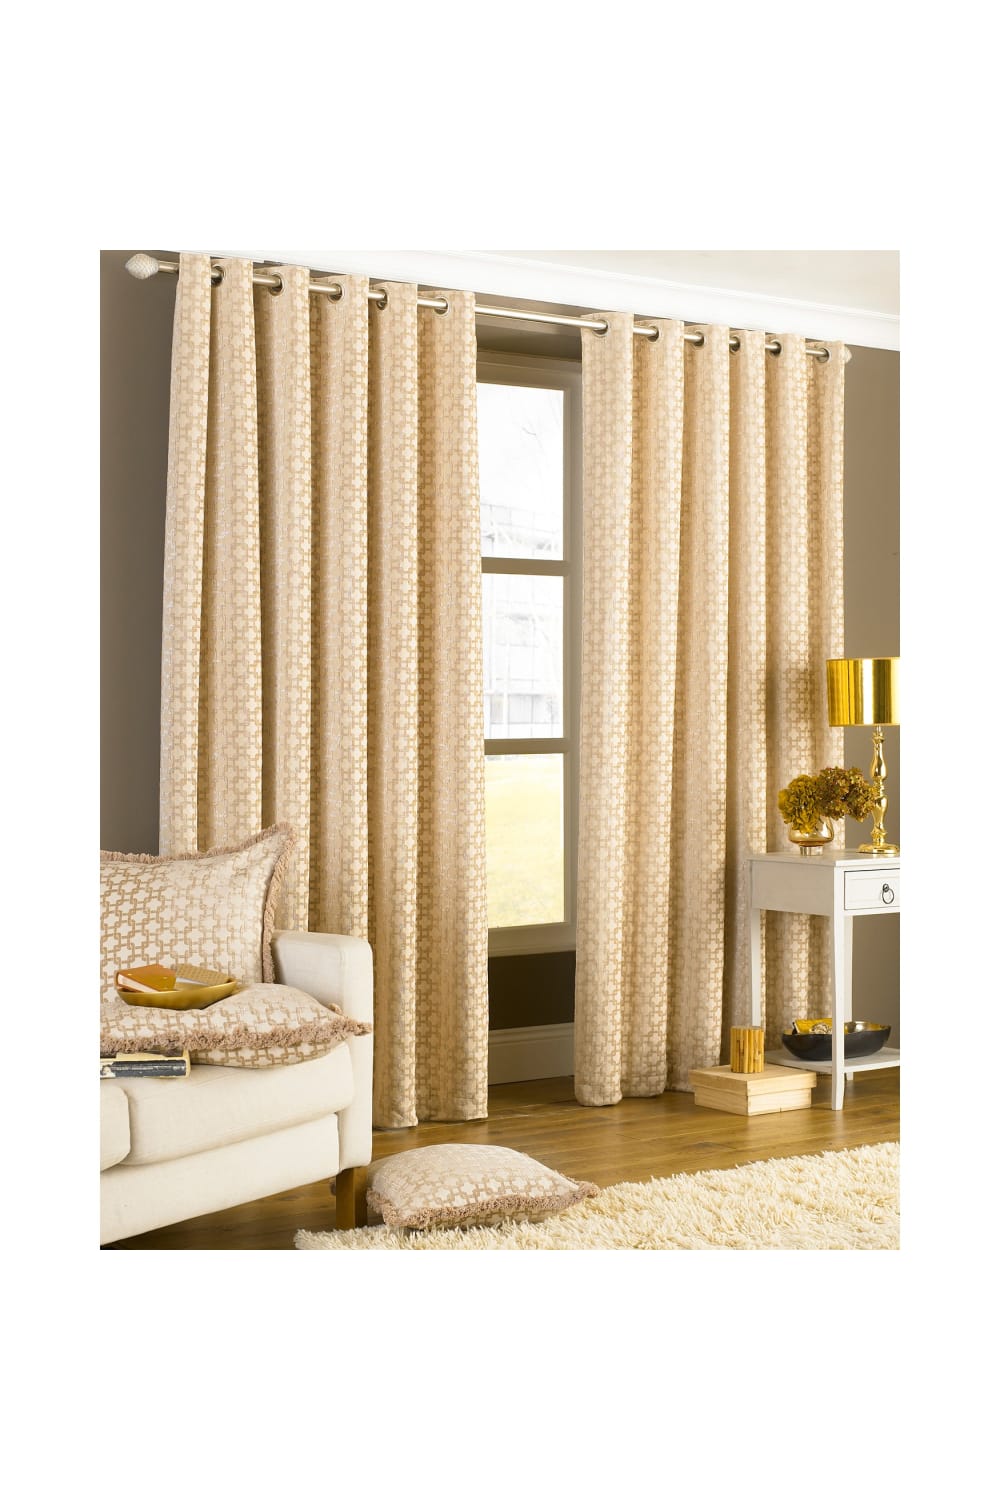 Riva Home Belmont Ringtop Curtains (Beige) (66 x 90 inch)